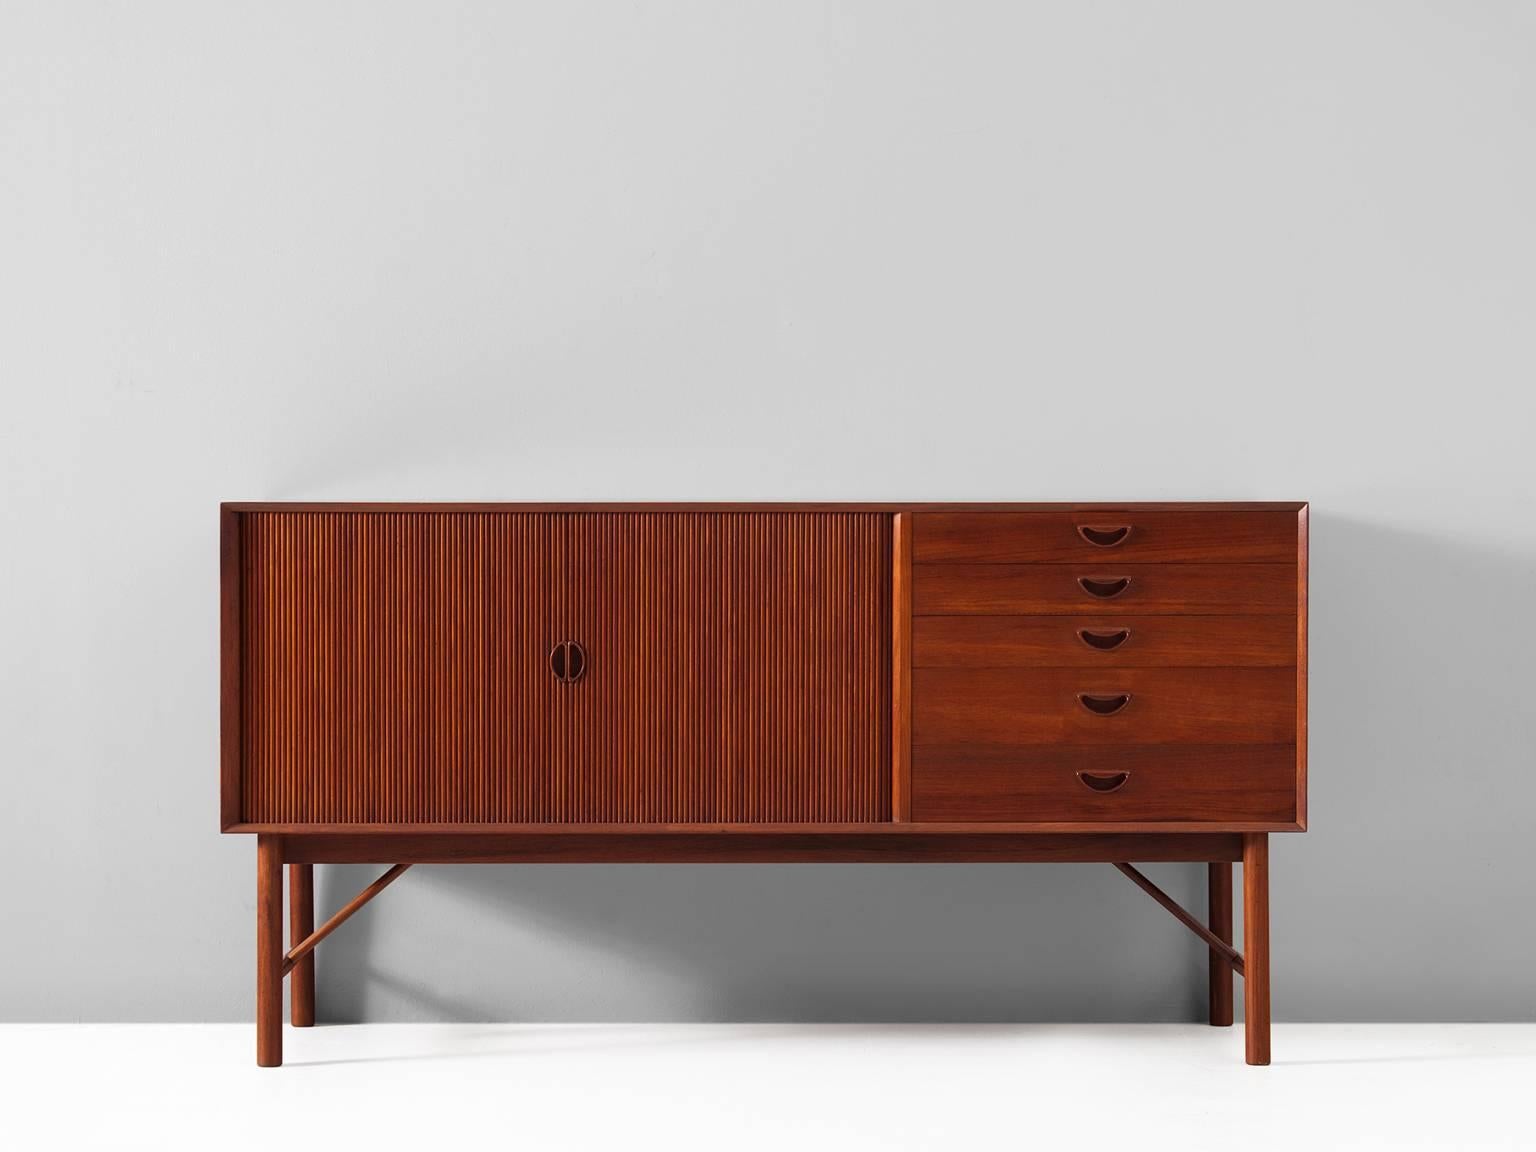 Credenza, teak by Peter Hvidt and Orla Mølgaard Nielsen, Denmark, 1950s.

High quality and Fine designed credenza in teak by Danish designer duo Peter Hvidt and Orla Mølgaard Nielsen. This cabinet shows beautiful detailed tambour-doors. The duo's